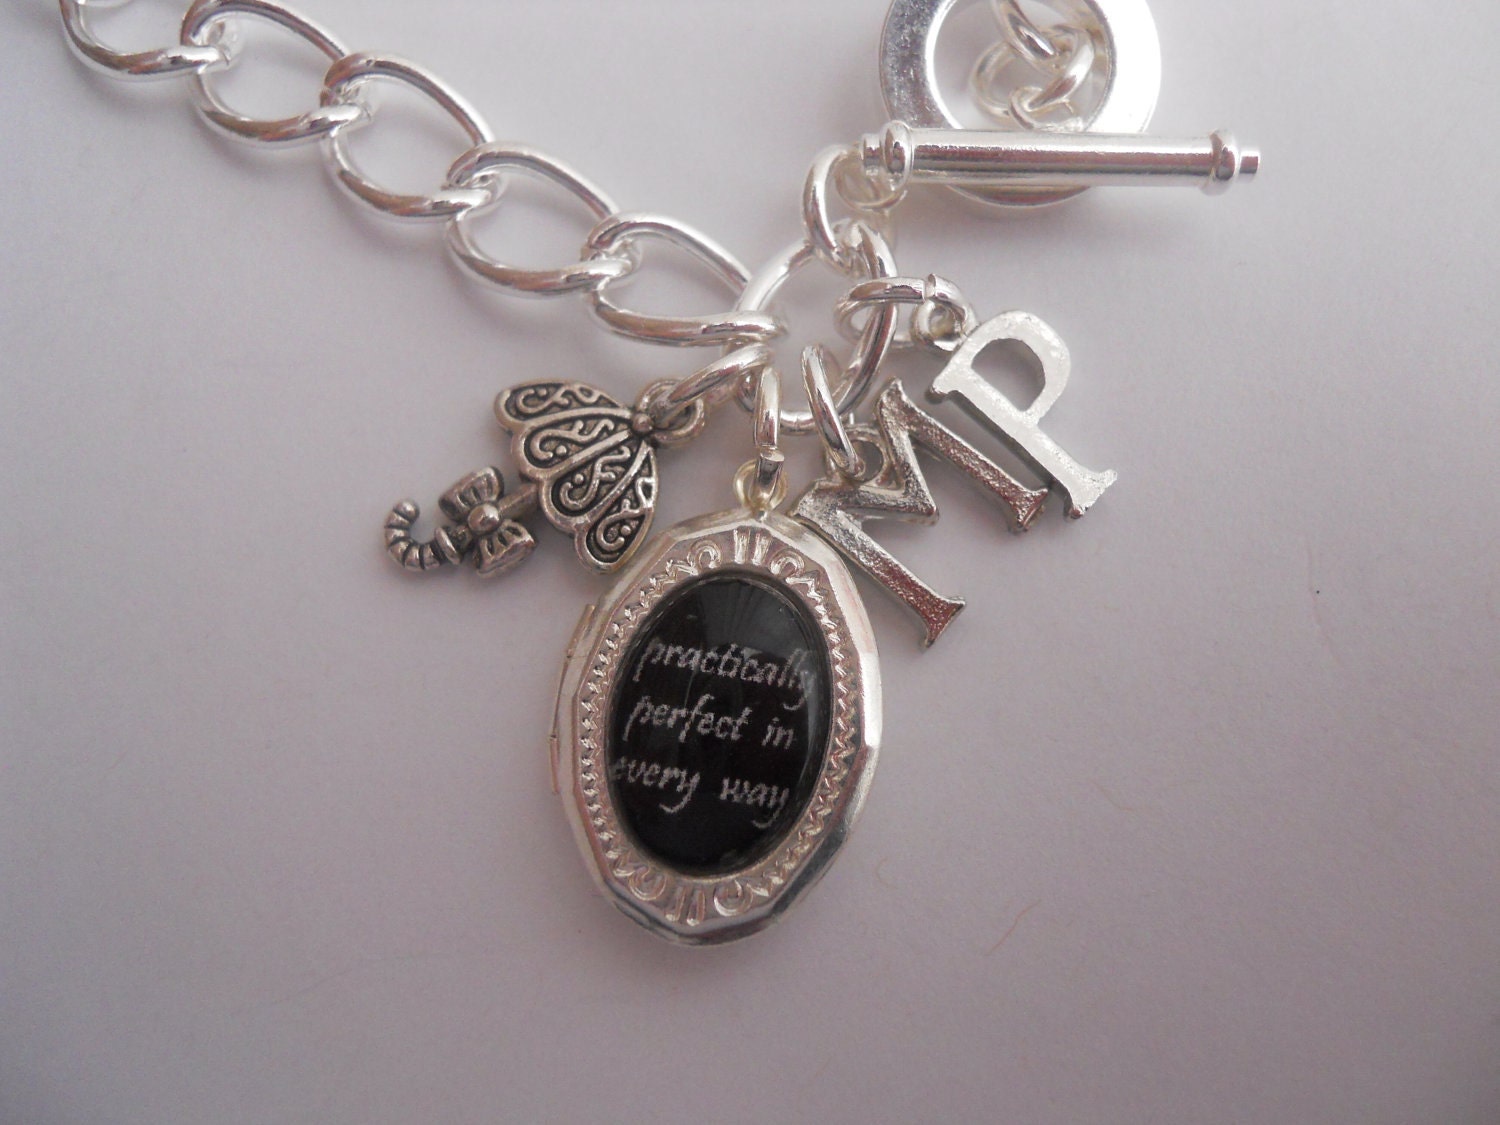 Mary Poppins Practically Perfect In Every Way Silver Locket